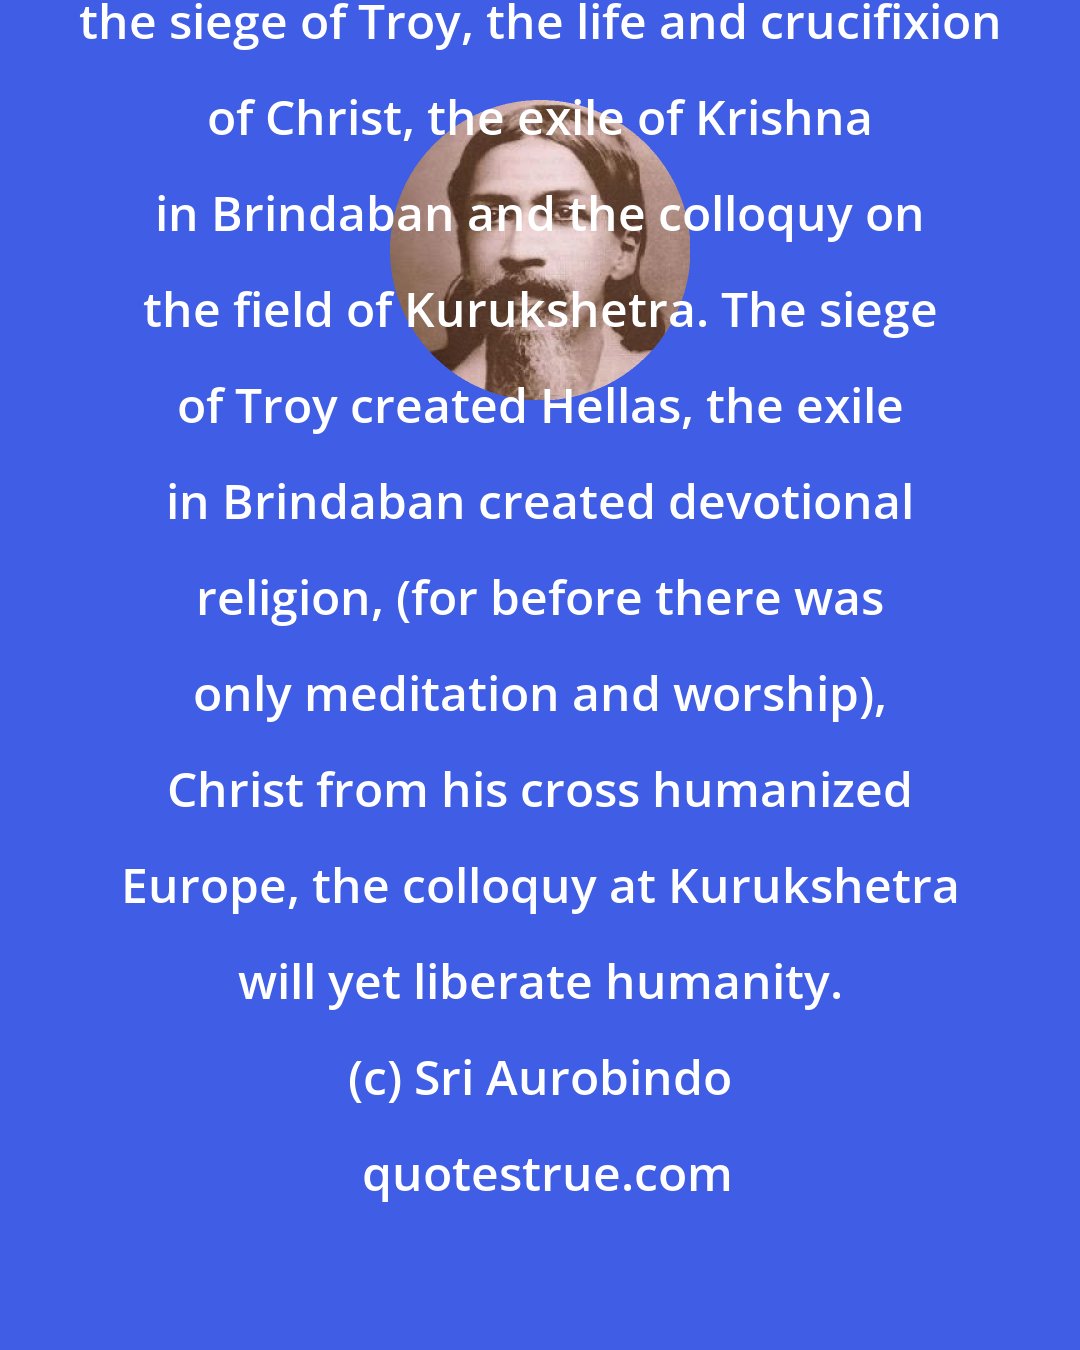 Sri Aurobindo: There are four great events in history, the siege of Troy, the life and crucifixion of Christ, the exile of Krishna in Brindaban and the colloquy on the field of Kurukshetra. The siege of Troy created Hellas, the exile in Brindaban created devotional religion, (for before there was only meditation and worship), Christ from his cross humanized Europe, the colloquy at Kurukshetra will yet liberate humanity.